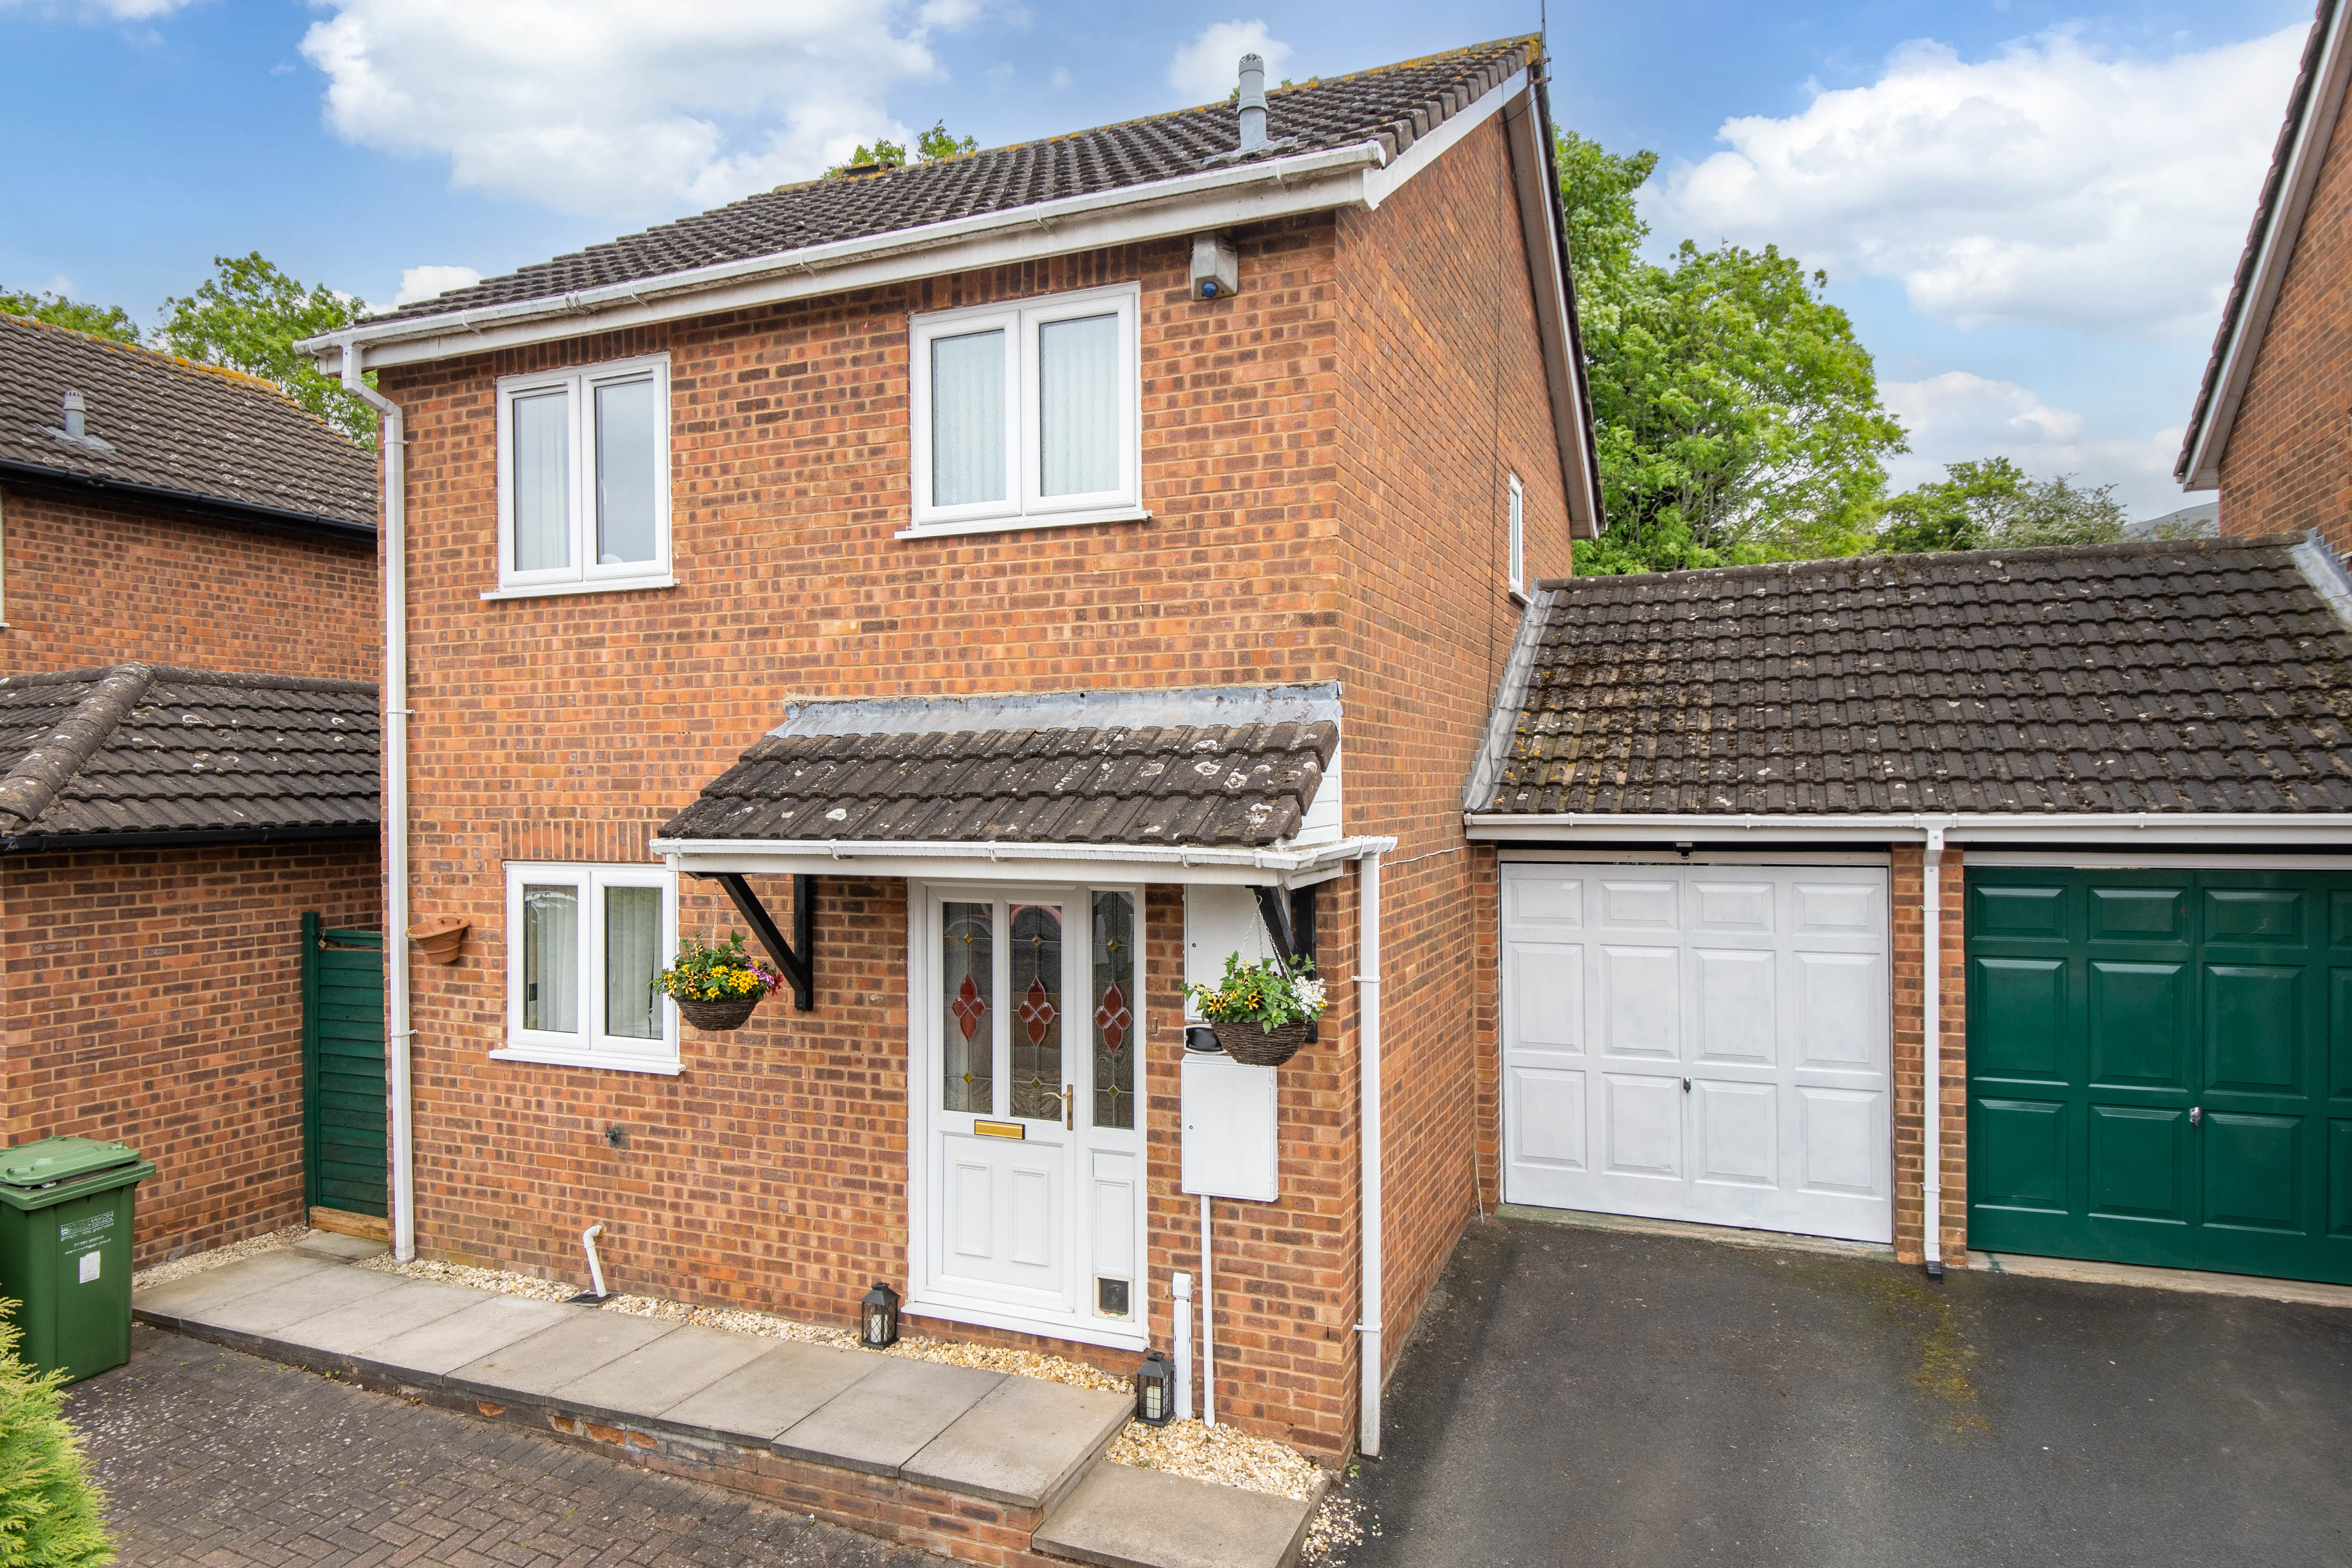 3 bed house for sale in Barns Croft Way, Droitwich 12